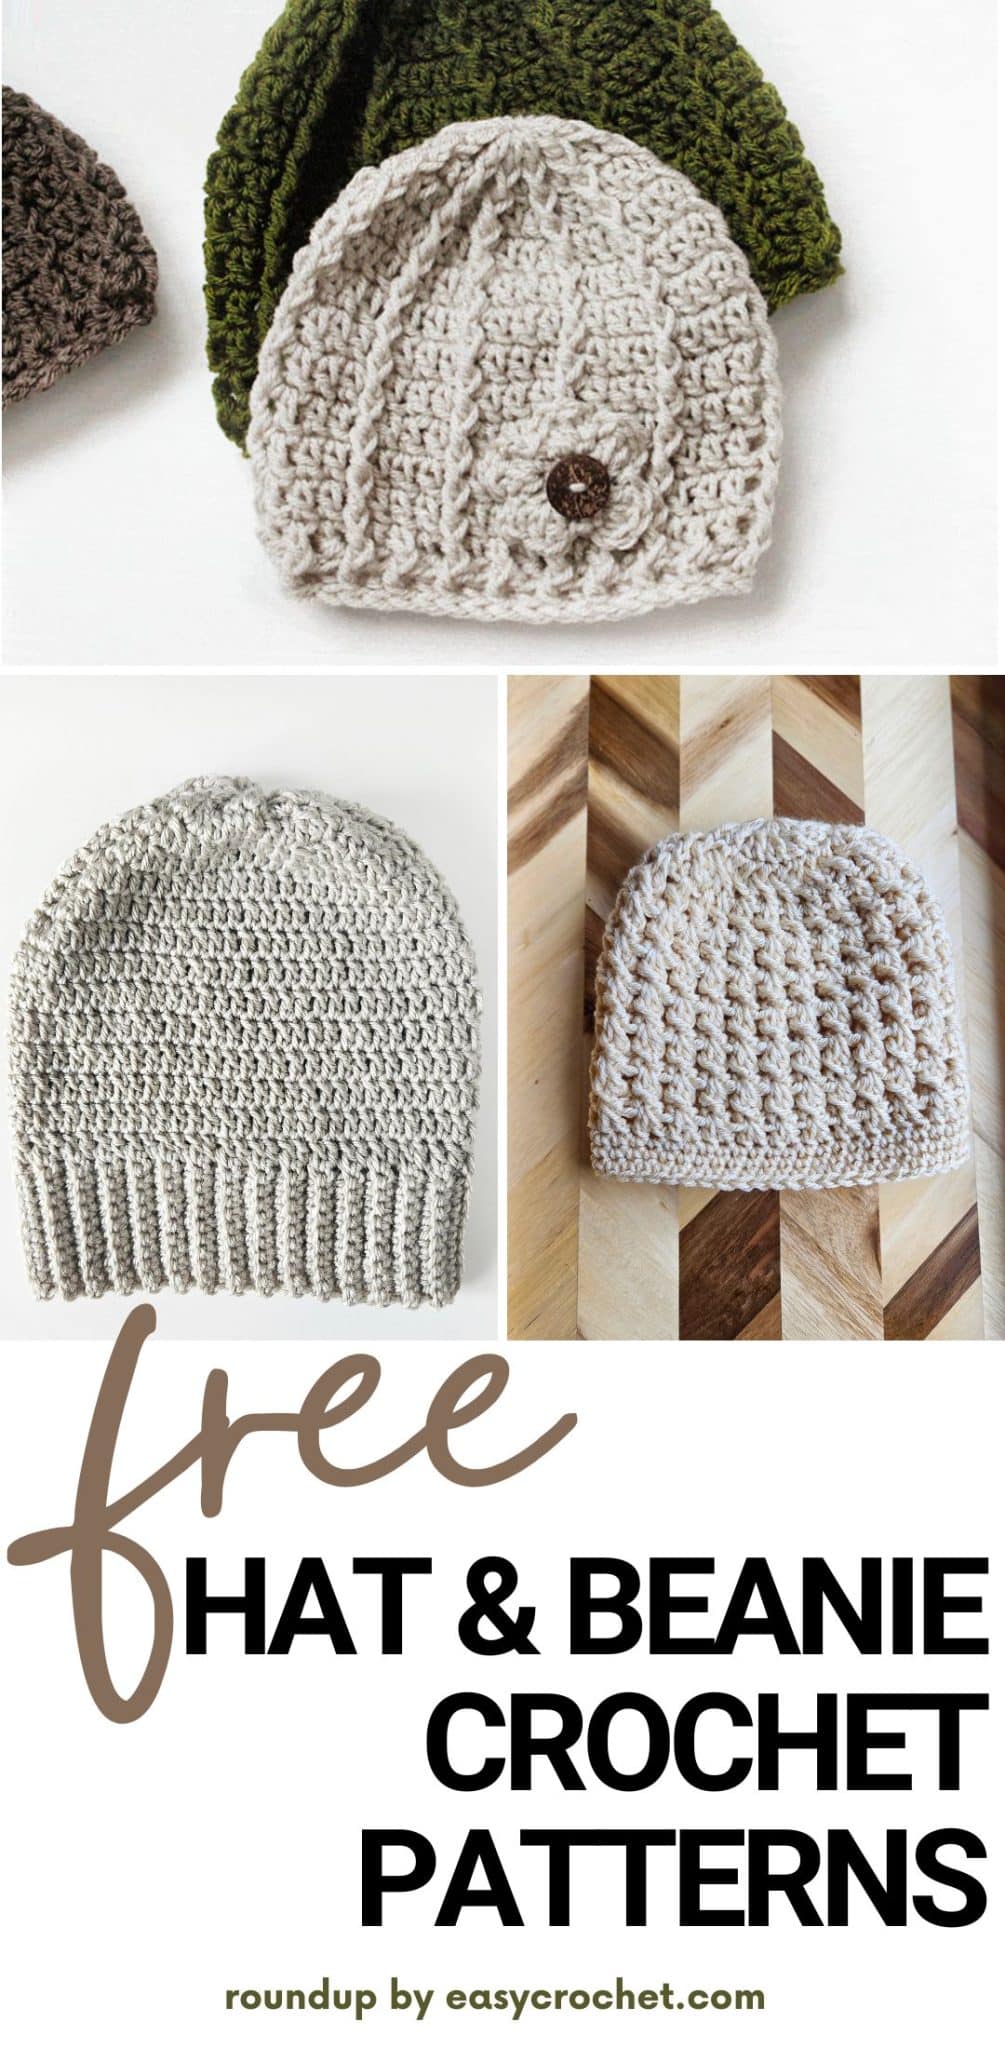 42 Free Patterns for Crochet Hats and Beanies - Easy Crochet Patterns